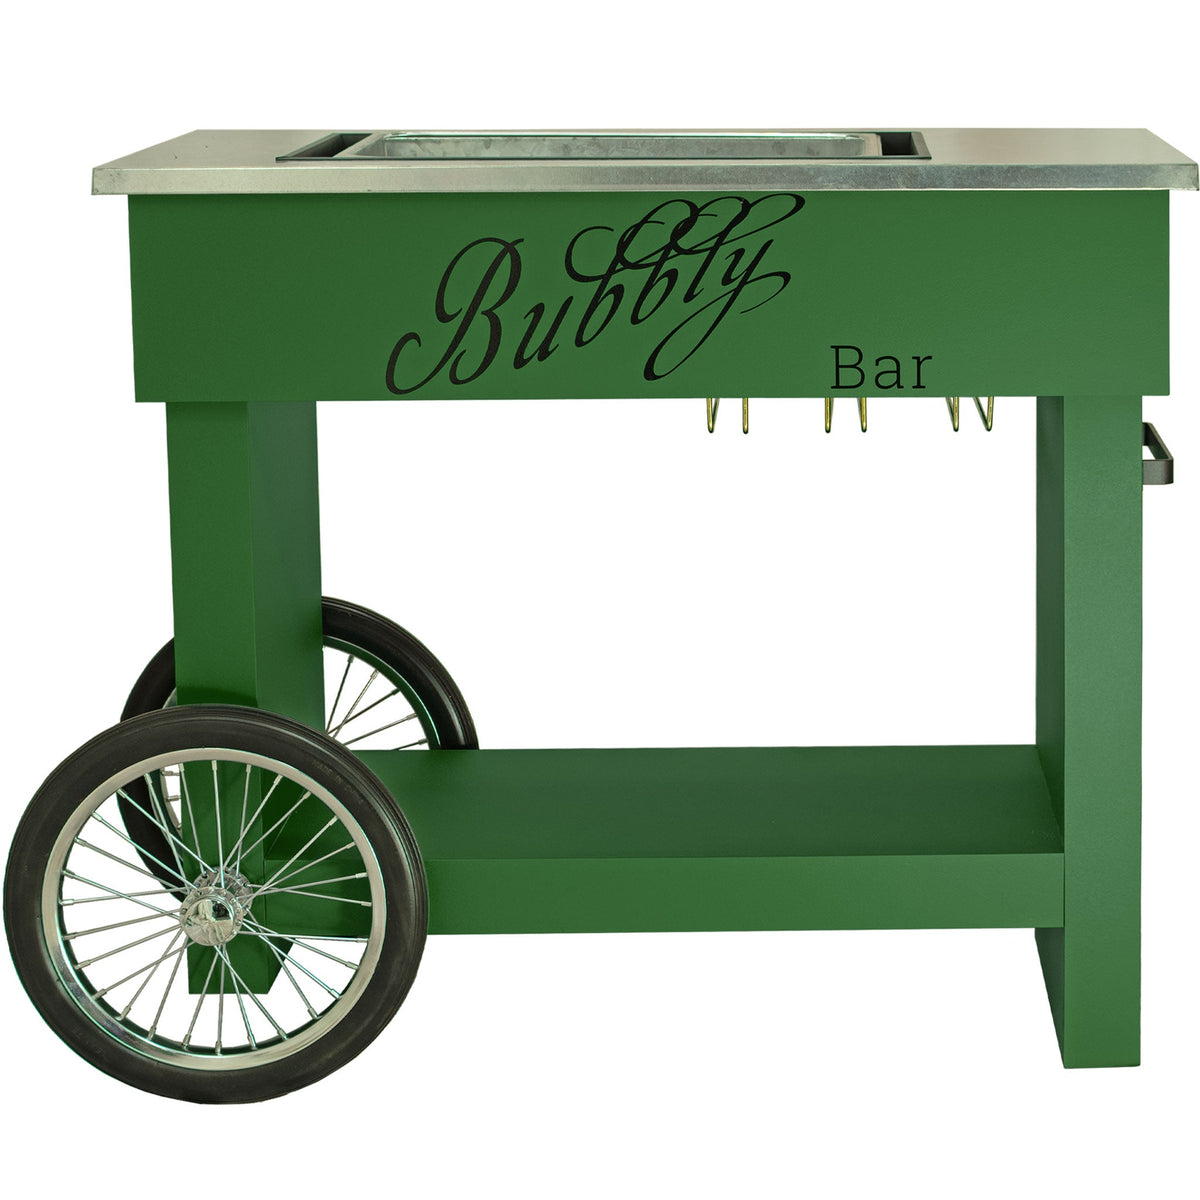 Lee Display's Champagne and Wine Bar Cart with Wheels in Green Color and a Bubbly Bar Decal